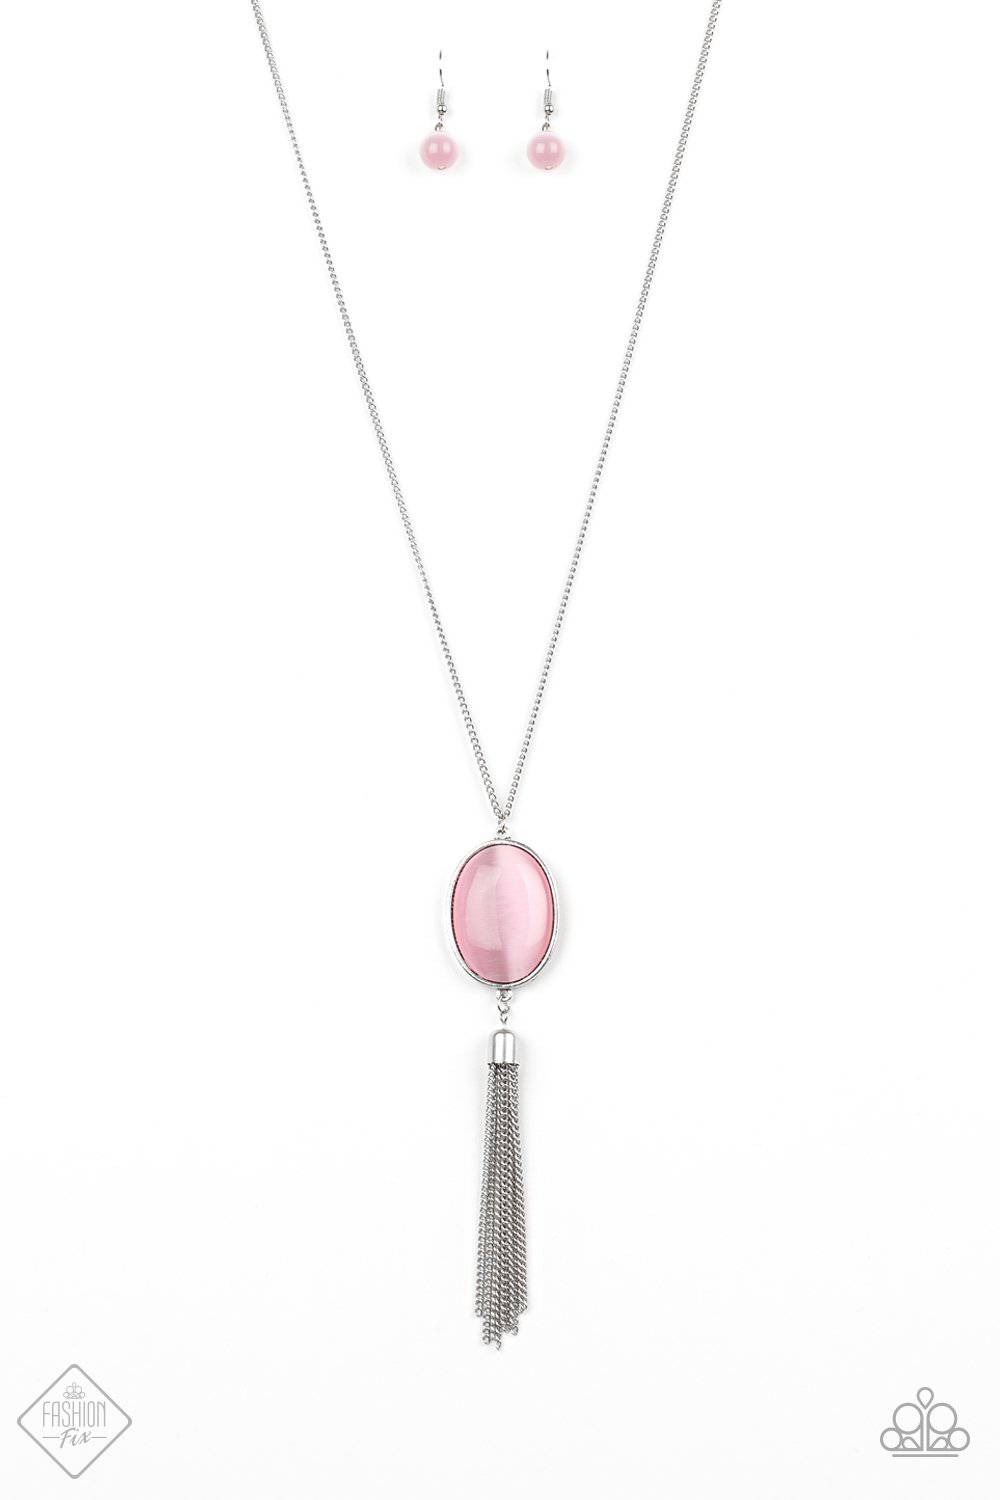 Tasseled Tranquility - Pink Cat's Eye Necklace - Paparazzi Accessories - GlaMarous Titi Jewels